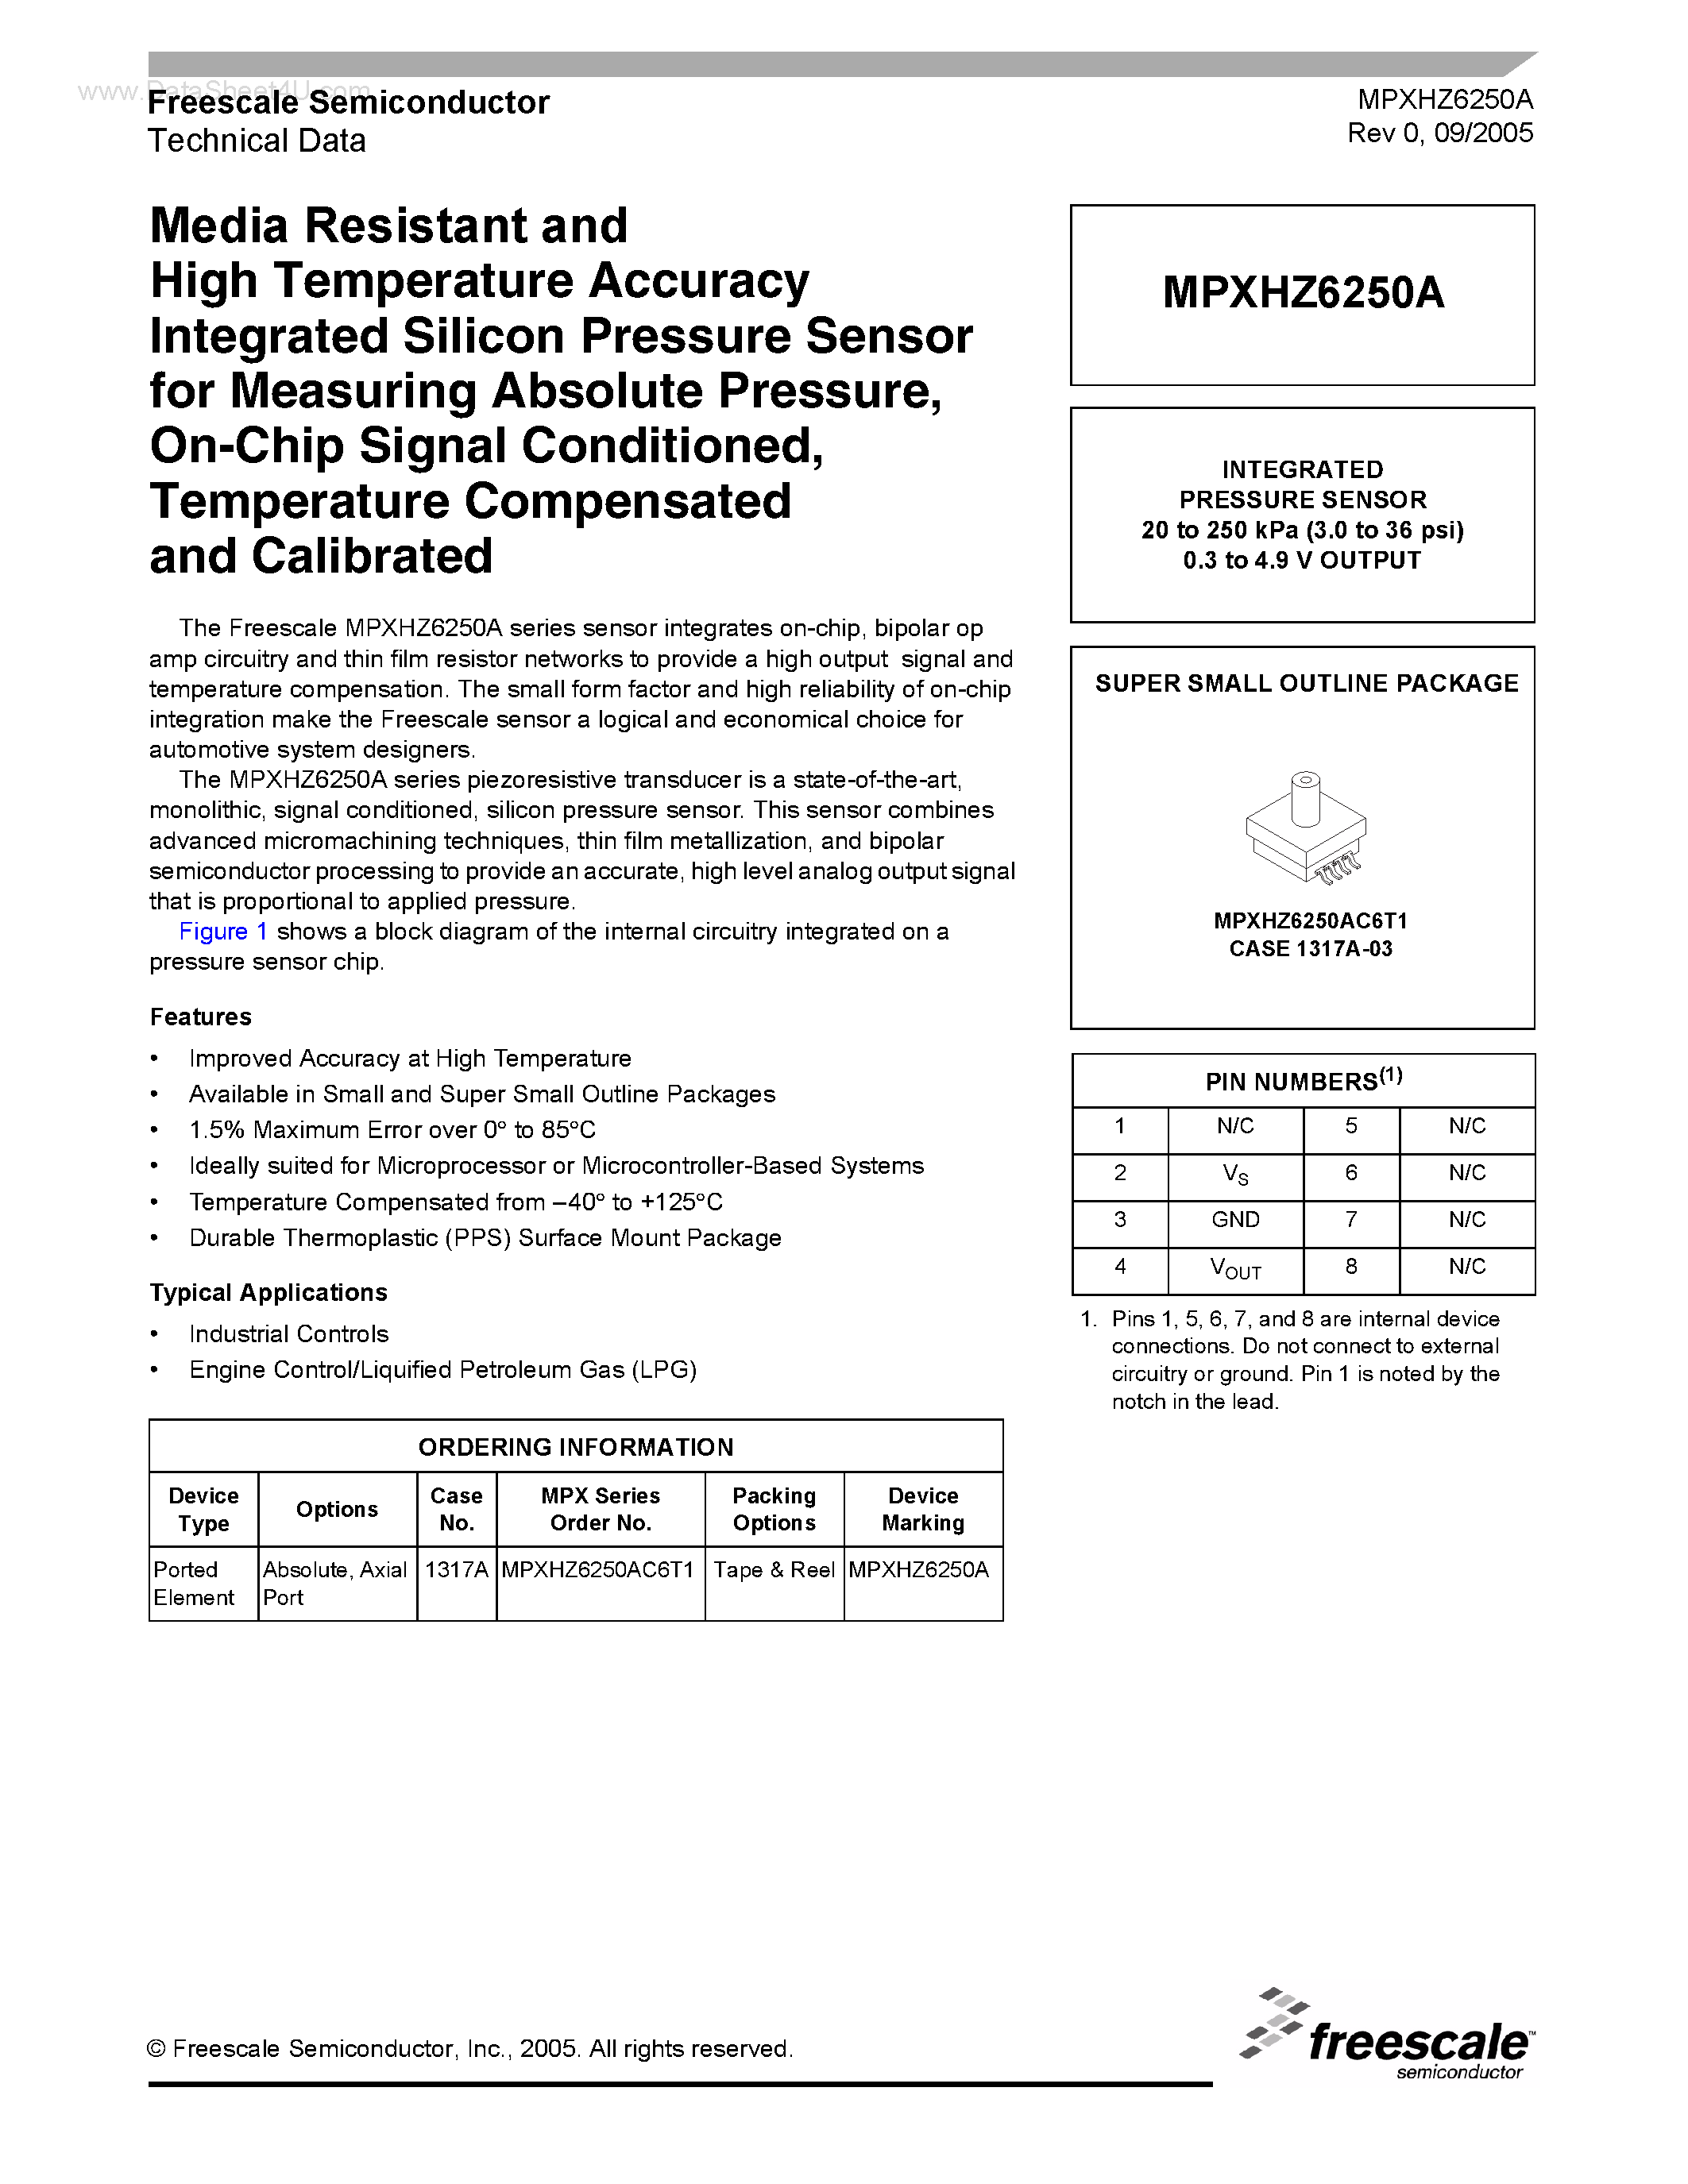 Даташит MPXHZ6250A - Media Resistant and High Temperature Accuracy Integrated Silicon Pressure Sensor страница 1